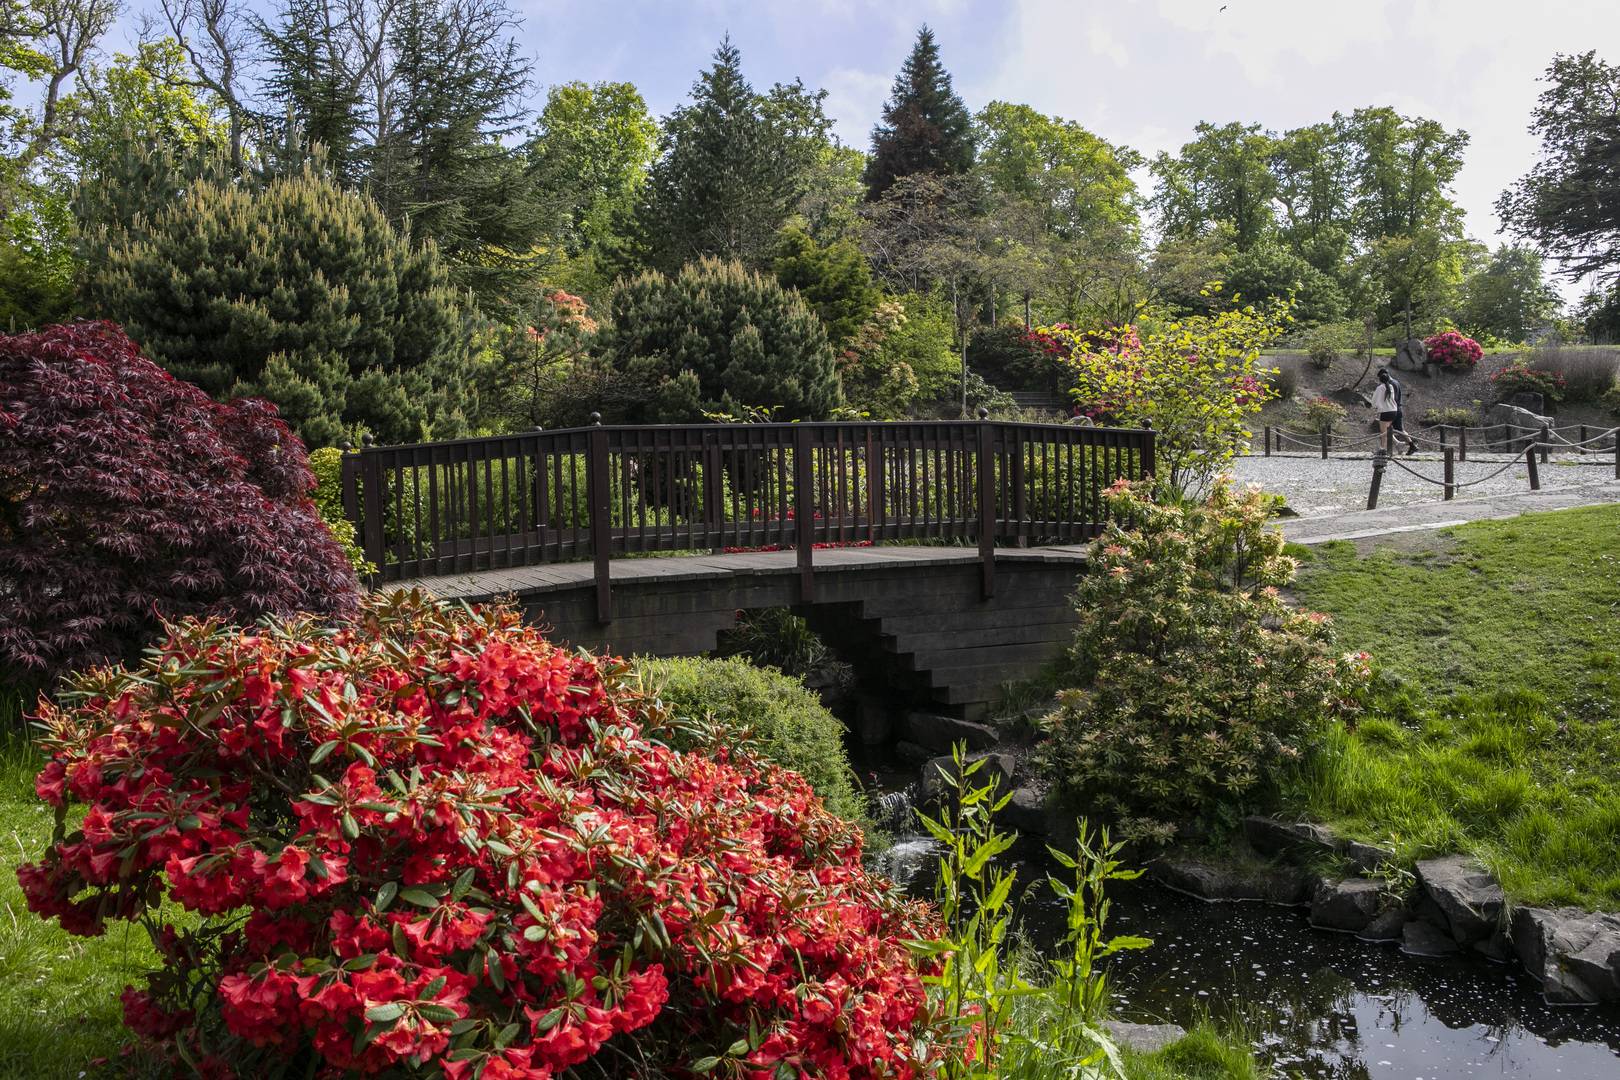 Bridge over lake surrounded by flowers, trees and grass.